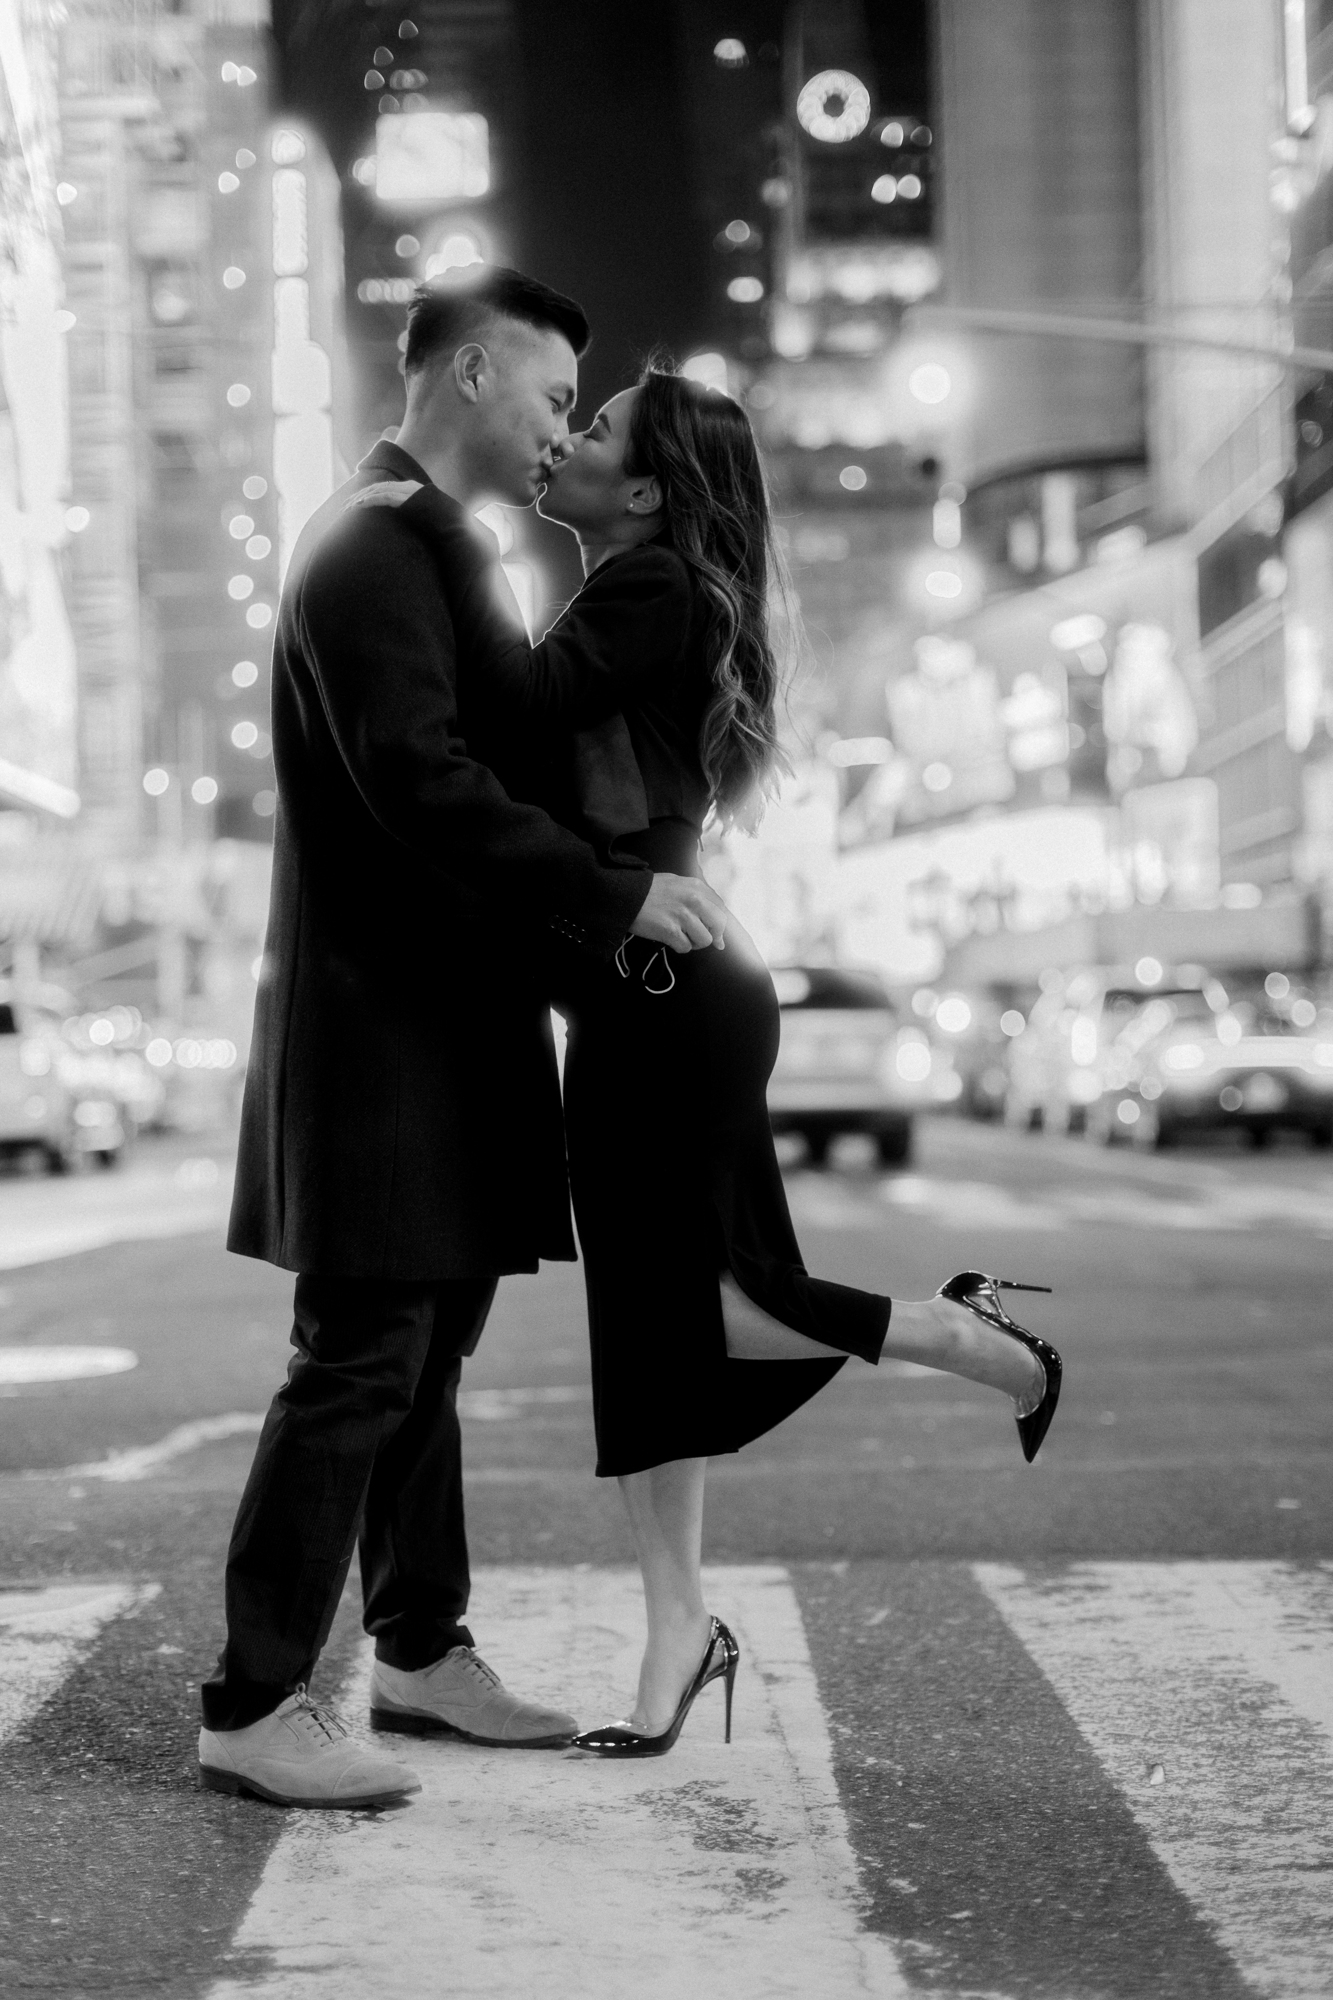 Vivid Nighttime Winter Engagement Photos in New York's Iconic Times Square